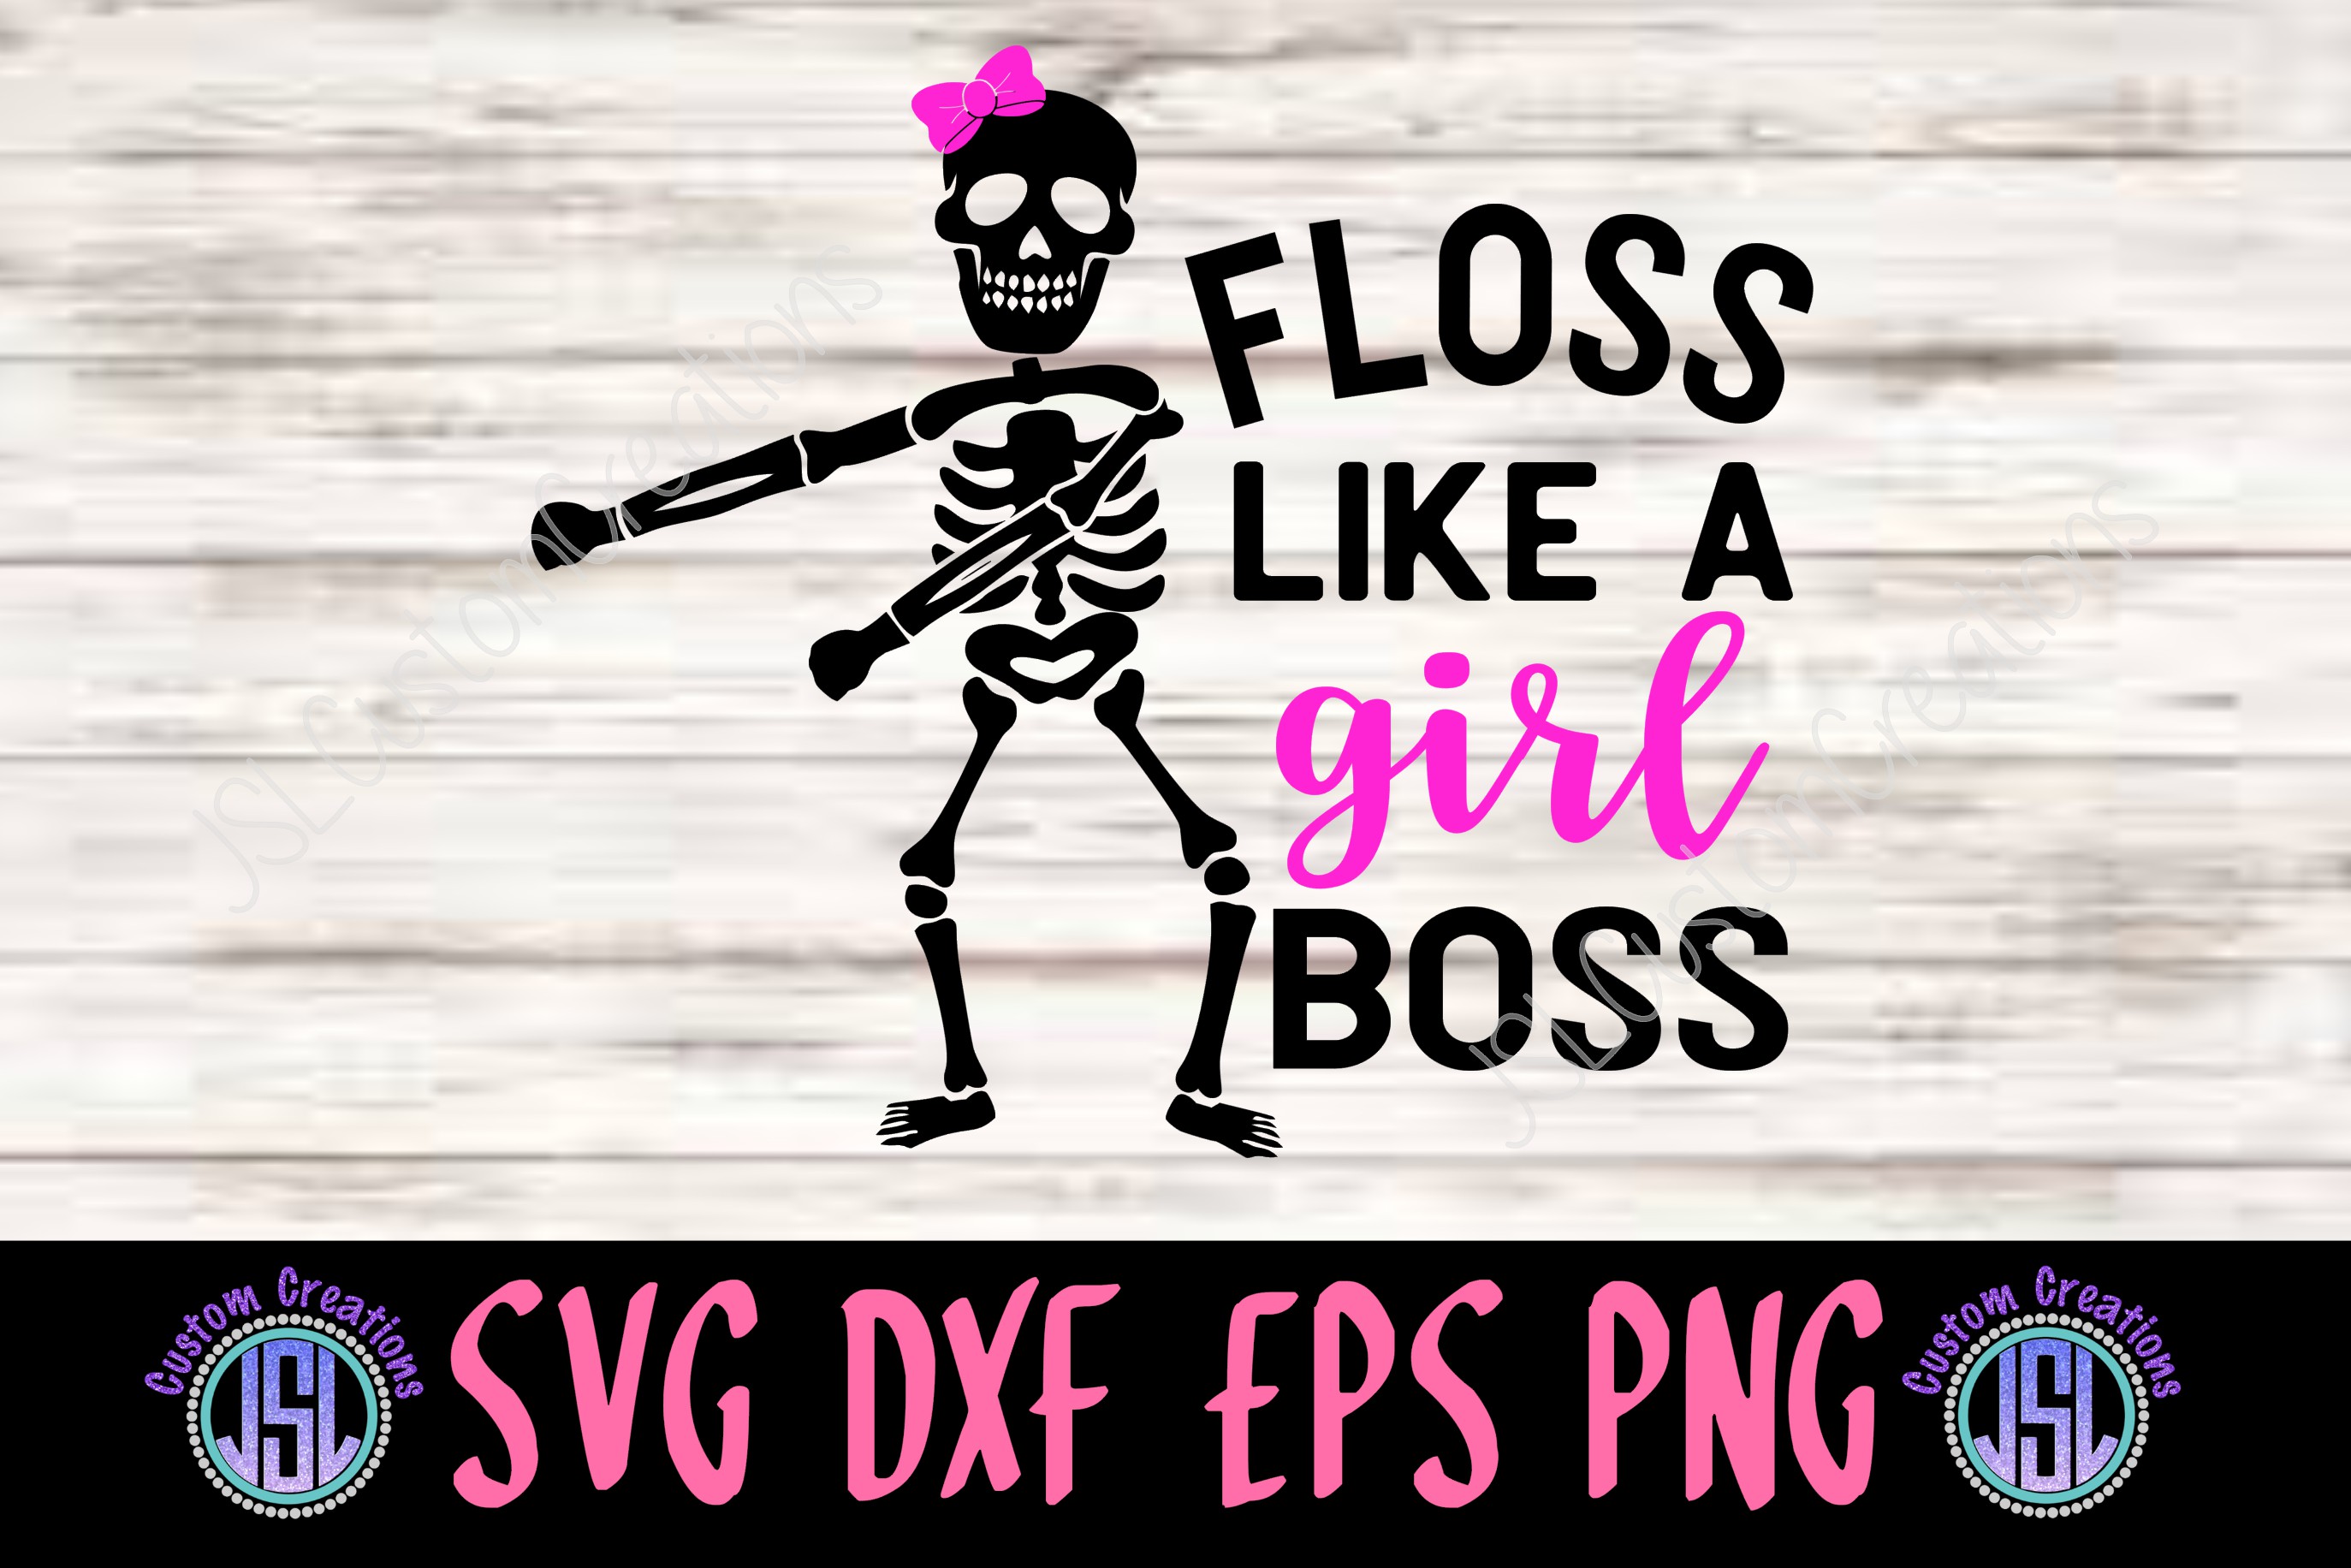 Download Floss Like a Girl Boss | SVG DXF EPS PNG Digital Cut File